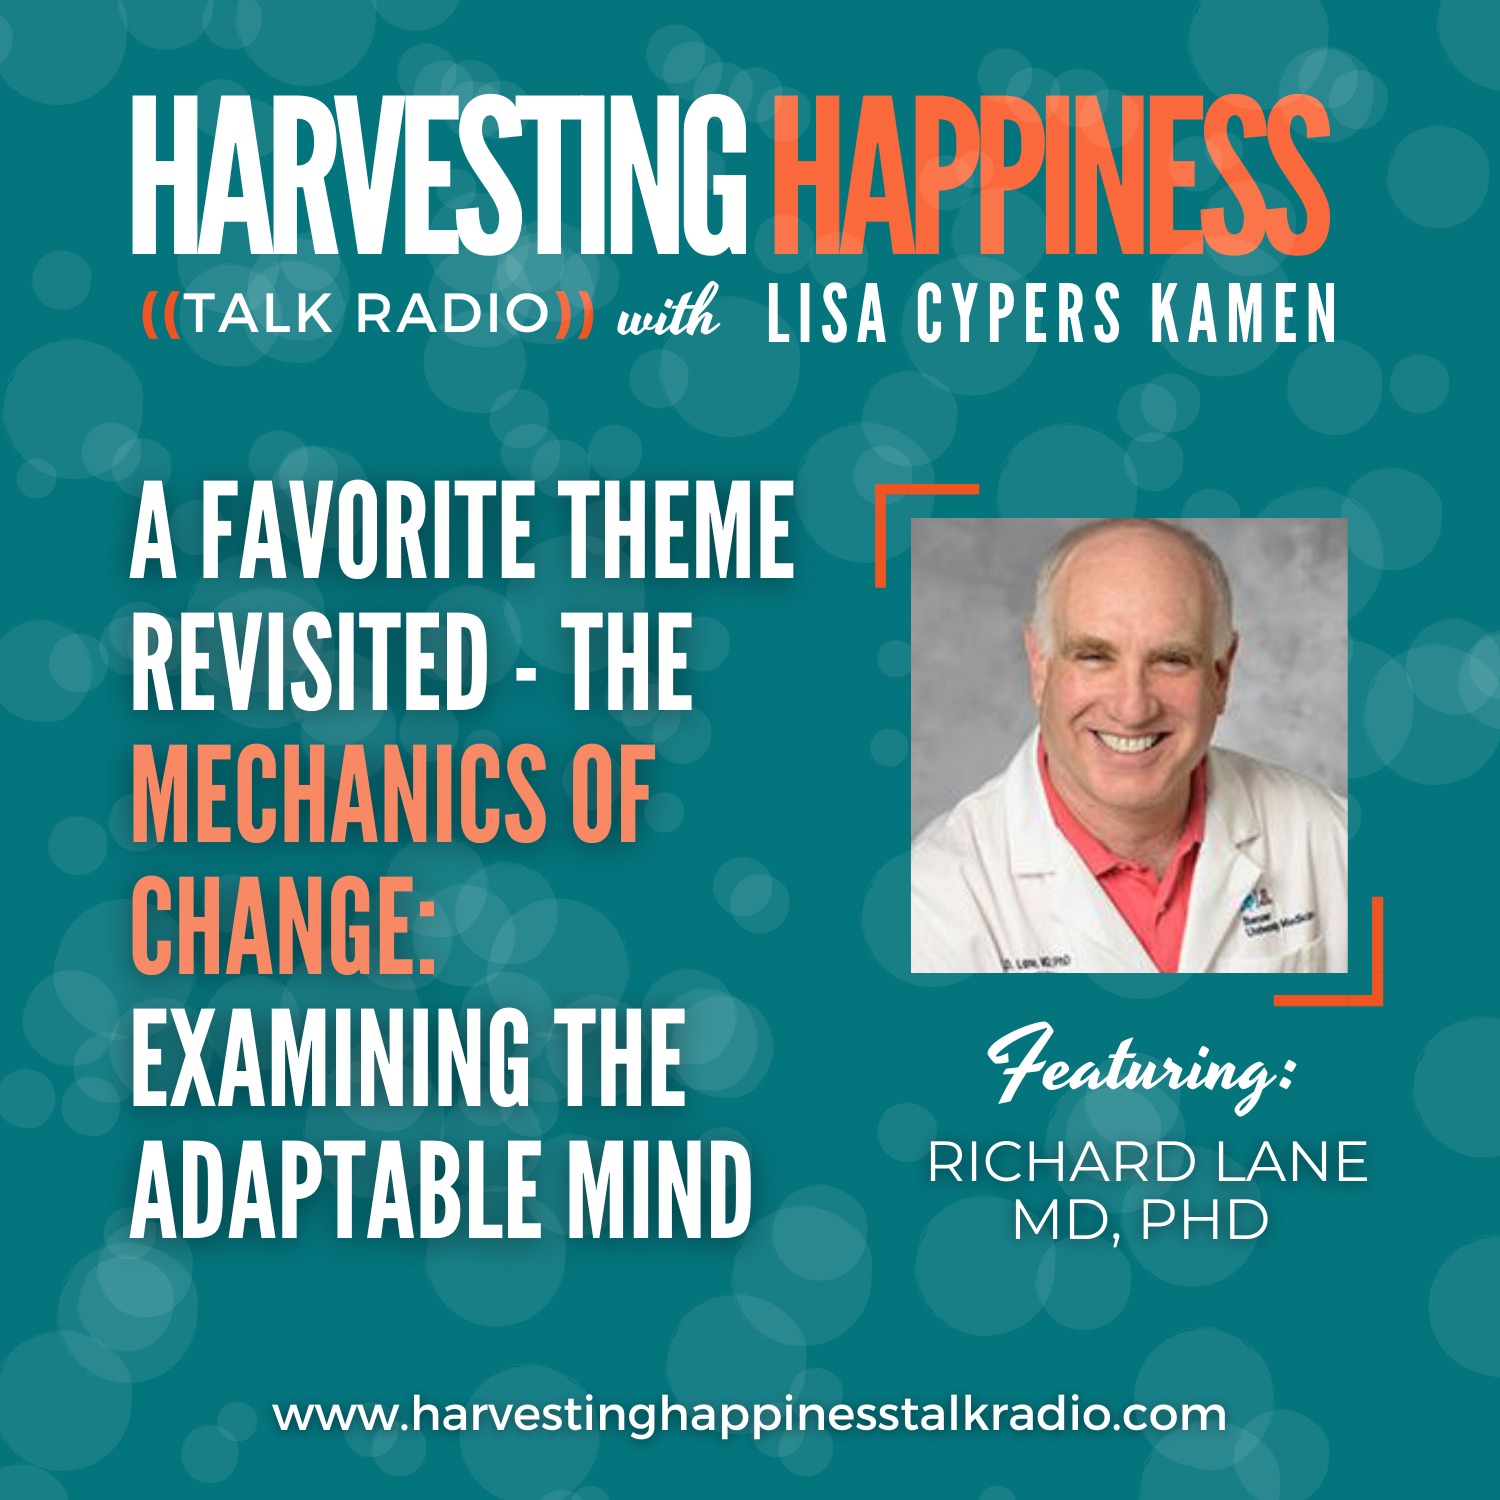 The Mechanics of Change: Examining the Adaptable Mind with Richard Lane MD, PhD